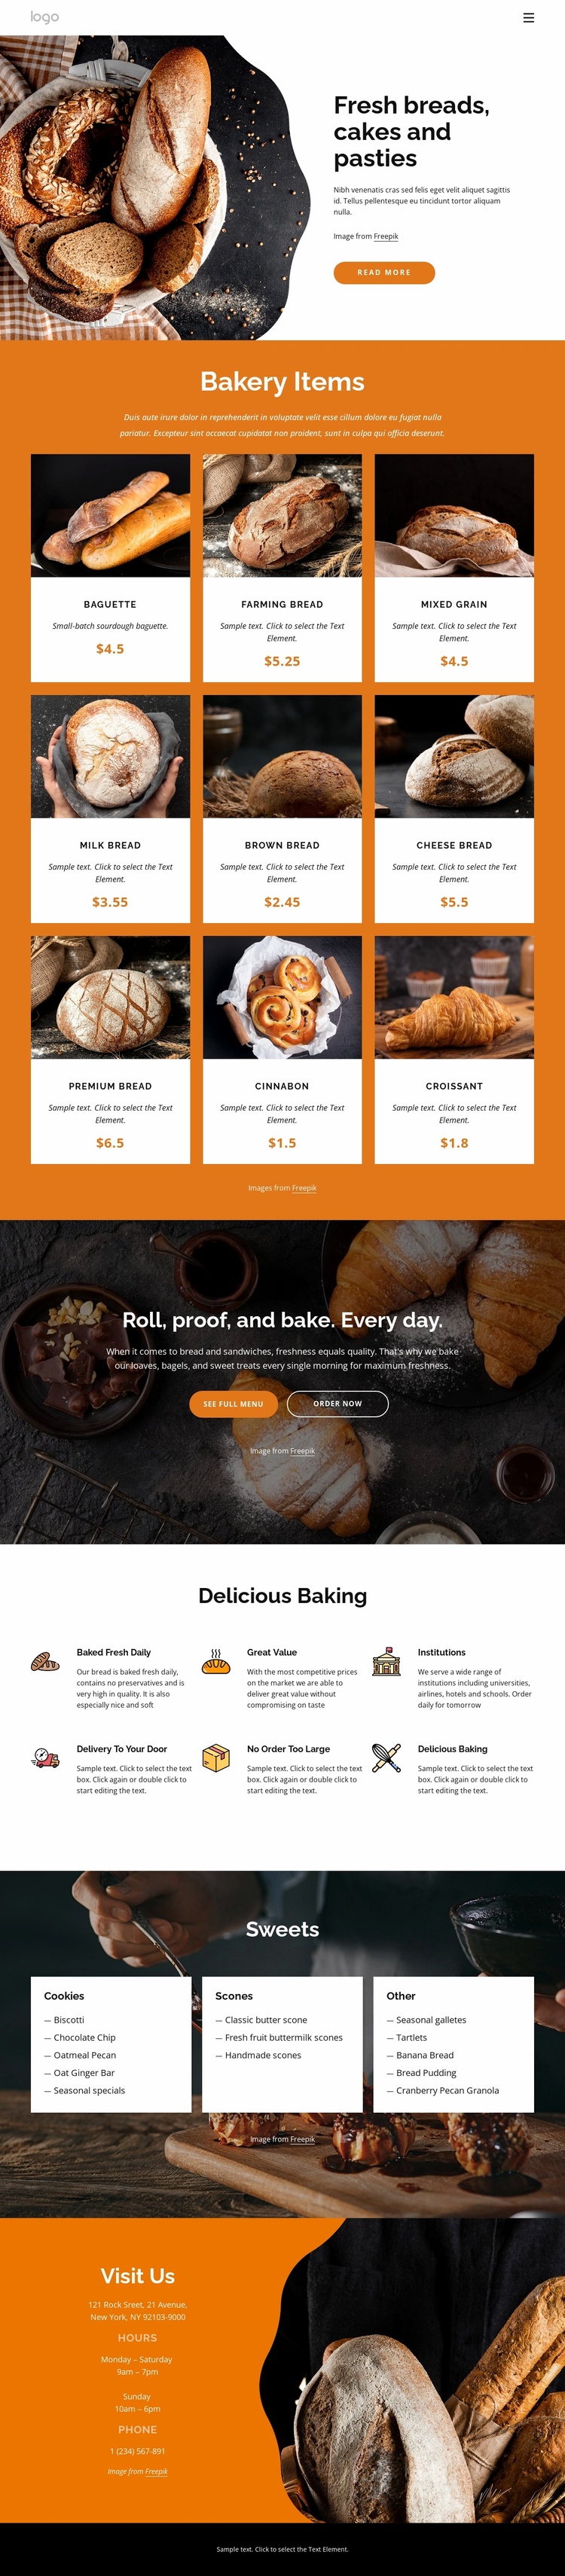 Fresh breads and cakes eCommerce Template